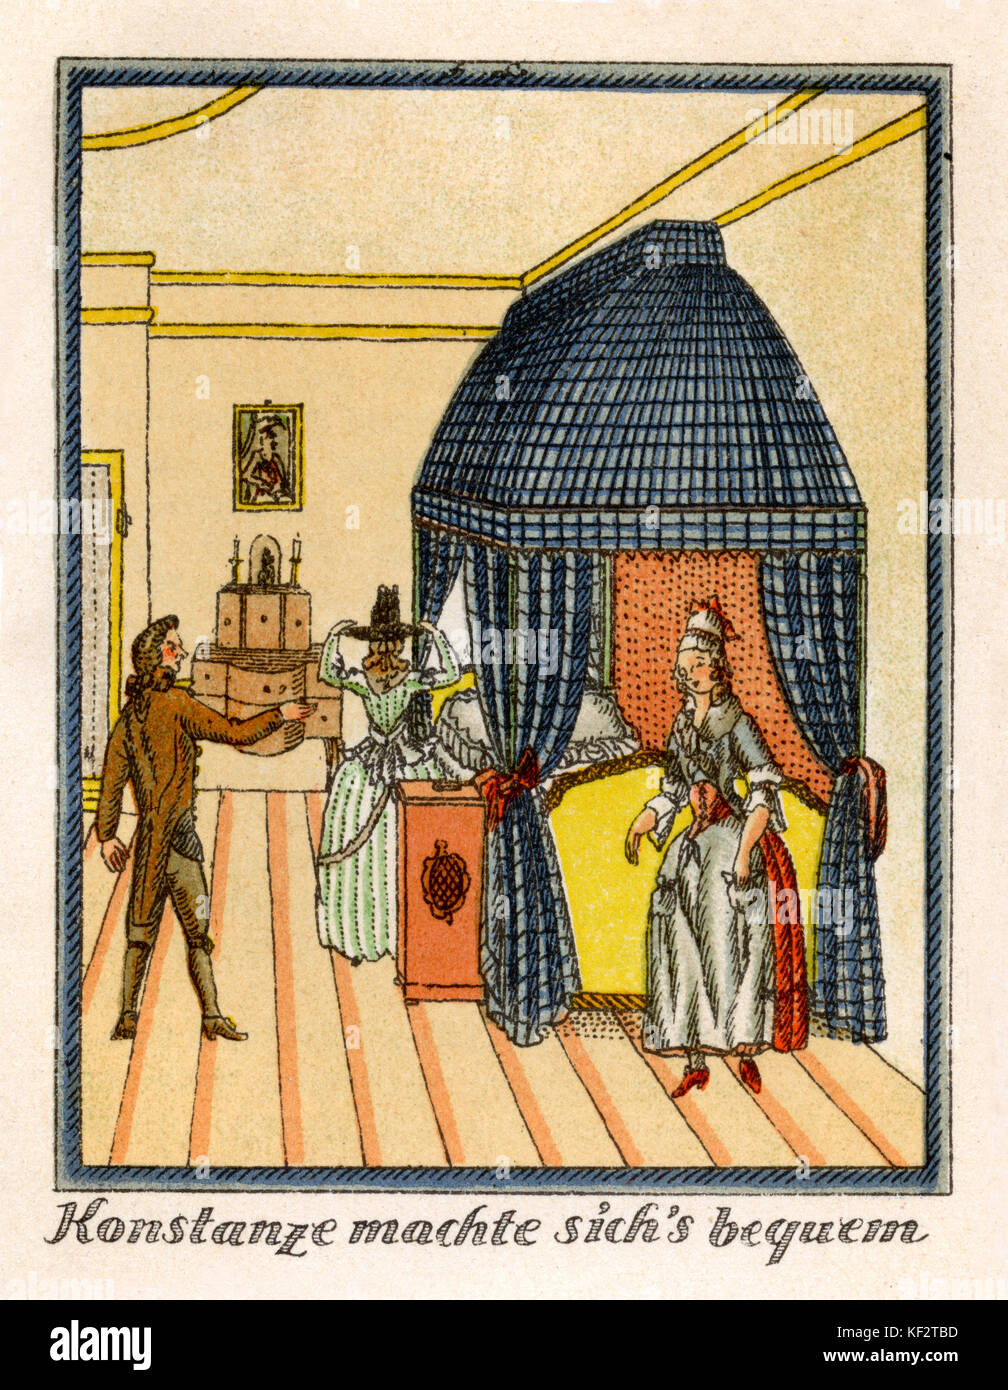 Mozart 's Journey to Prague, 1856. Fictional account of Mozart's journey with his wife Constanze in Autumn 1787 to Prague, where his opera Don Giovanni was to premiere. Caption reads: 'Konstanze machte sich's bequem' ['Constanze made herself comfortable']. Mozart and Constanze find themselves in the castle of the Count of Schinzberg.  EM:  German romantic poet and author, 8 September 1804 – 4 June 1875. WAM: Austrian composer, 27 January 1756 - 5 December 1791. Stock Photo